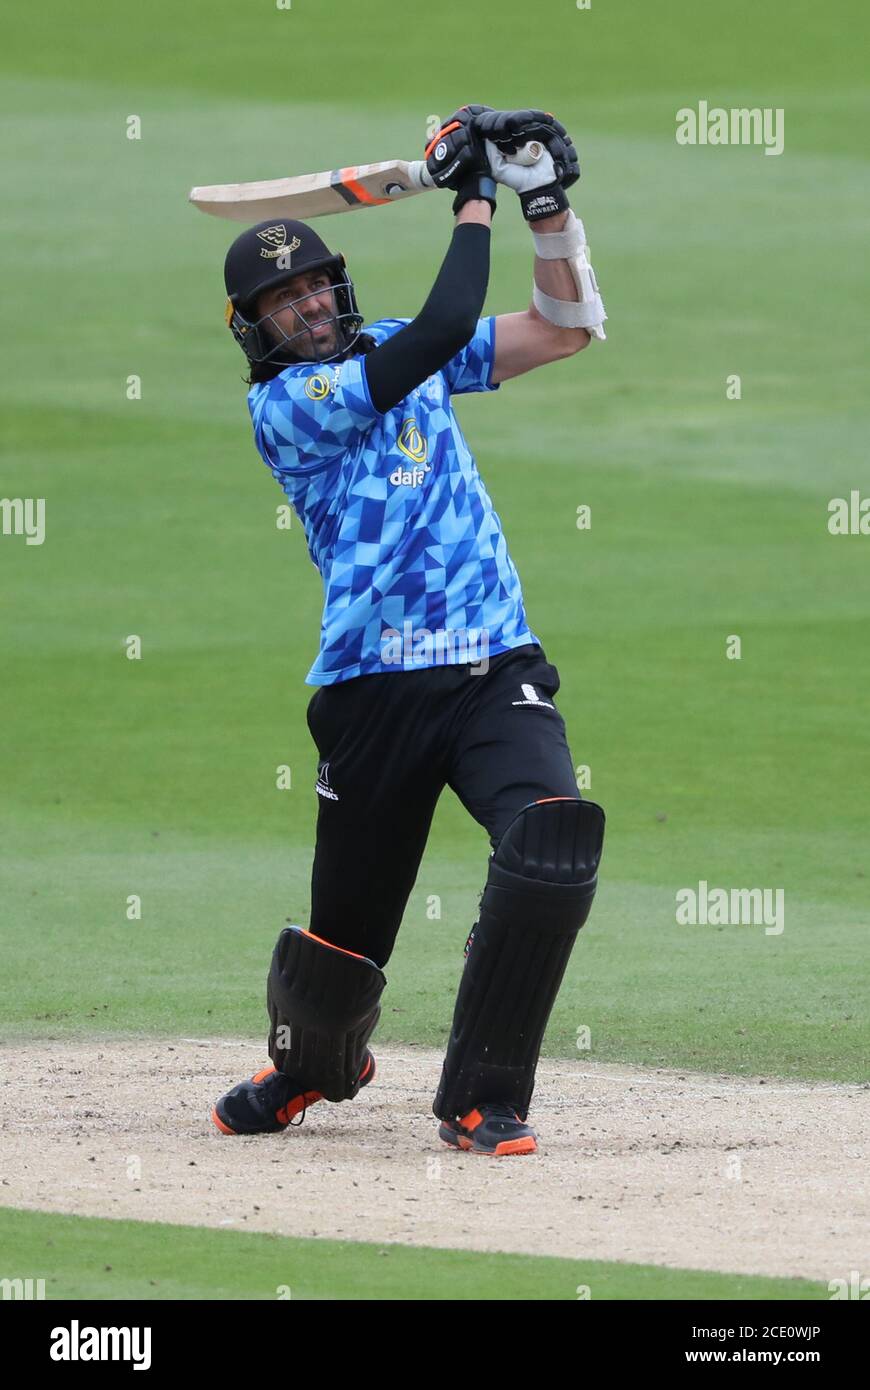 Hove, UK. 30th Aug, 2020. Sussex's David Wiese during the Vitality Blast T20 match between Sussex Sharks and Hampshire at The 1st Central County Ground, Hove Credit: James Boardman/Alamy Live News Stock Photo